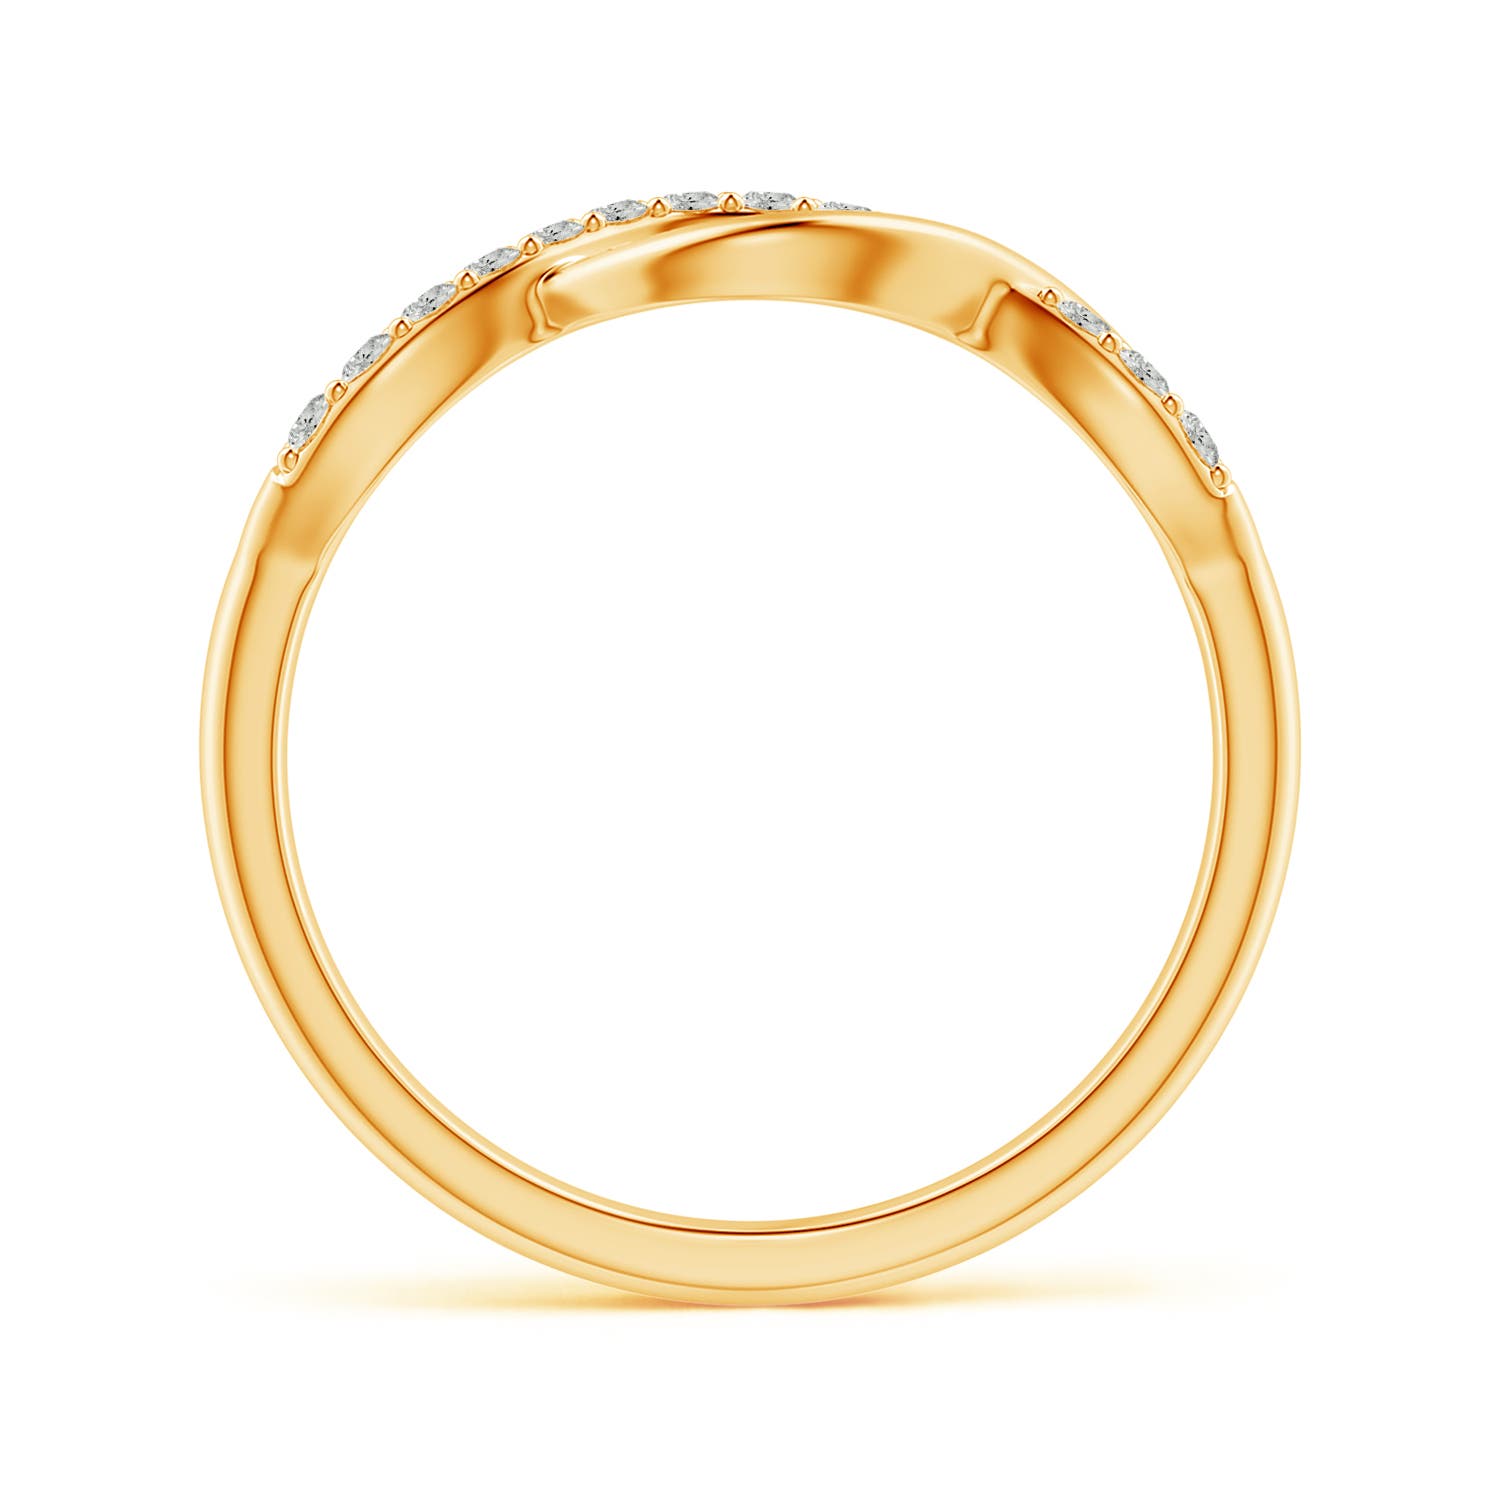 K, I3 / 0.14 CT / 14 KT Yellow Gold